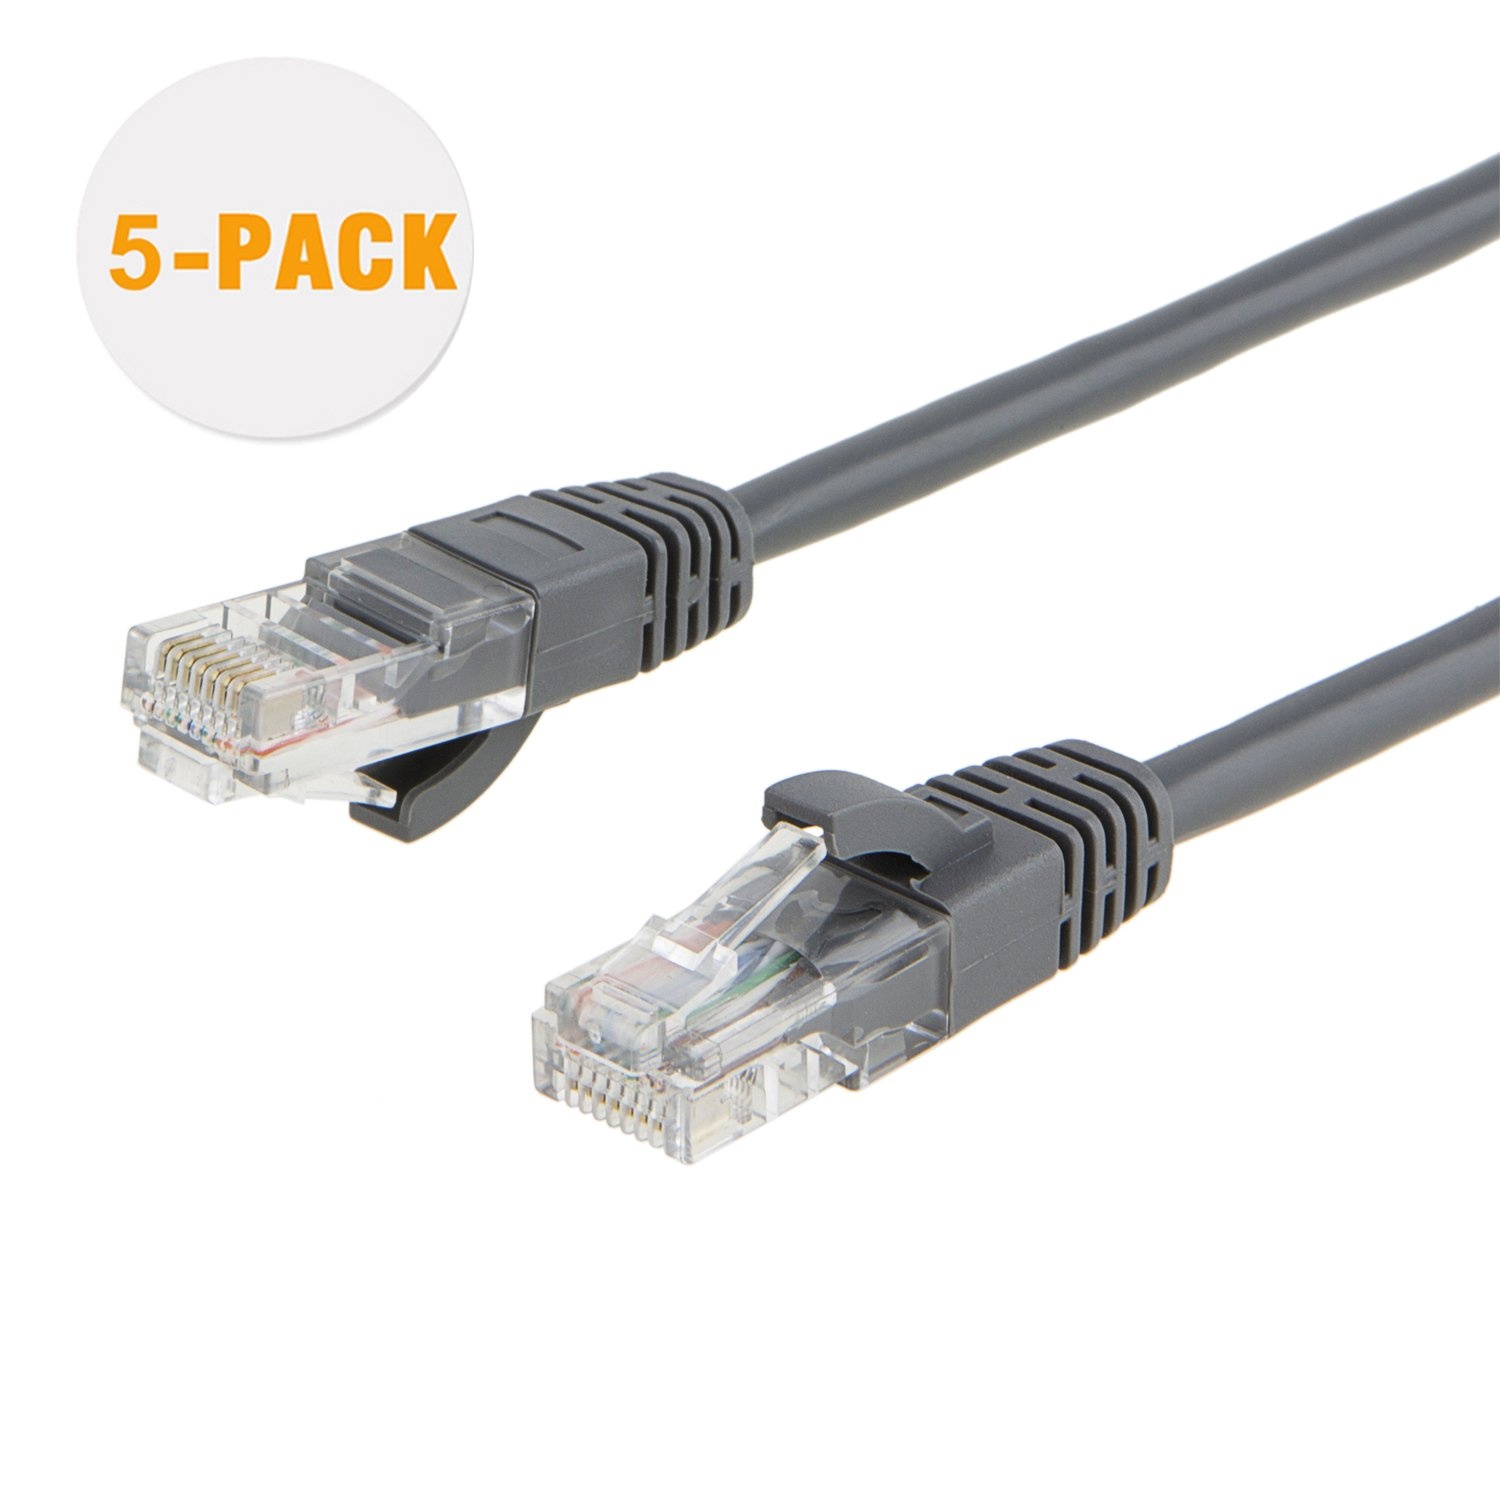 Short CAT 5e Ethernet Patch Cable 1Foot/0.3Meters, #CL0116